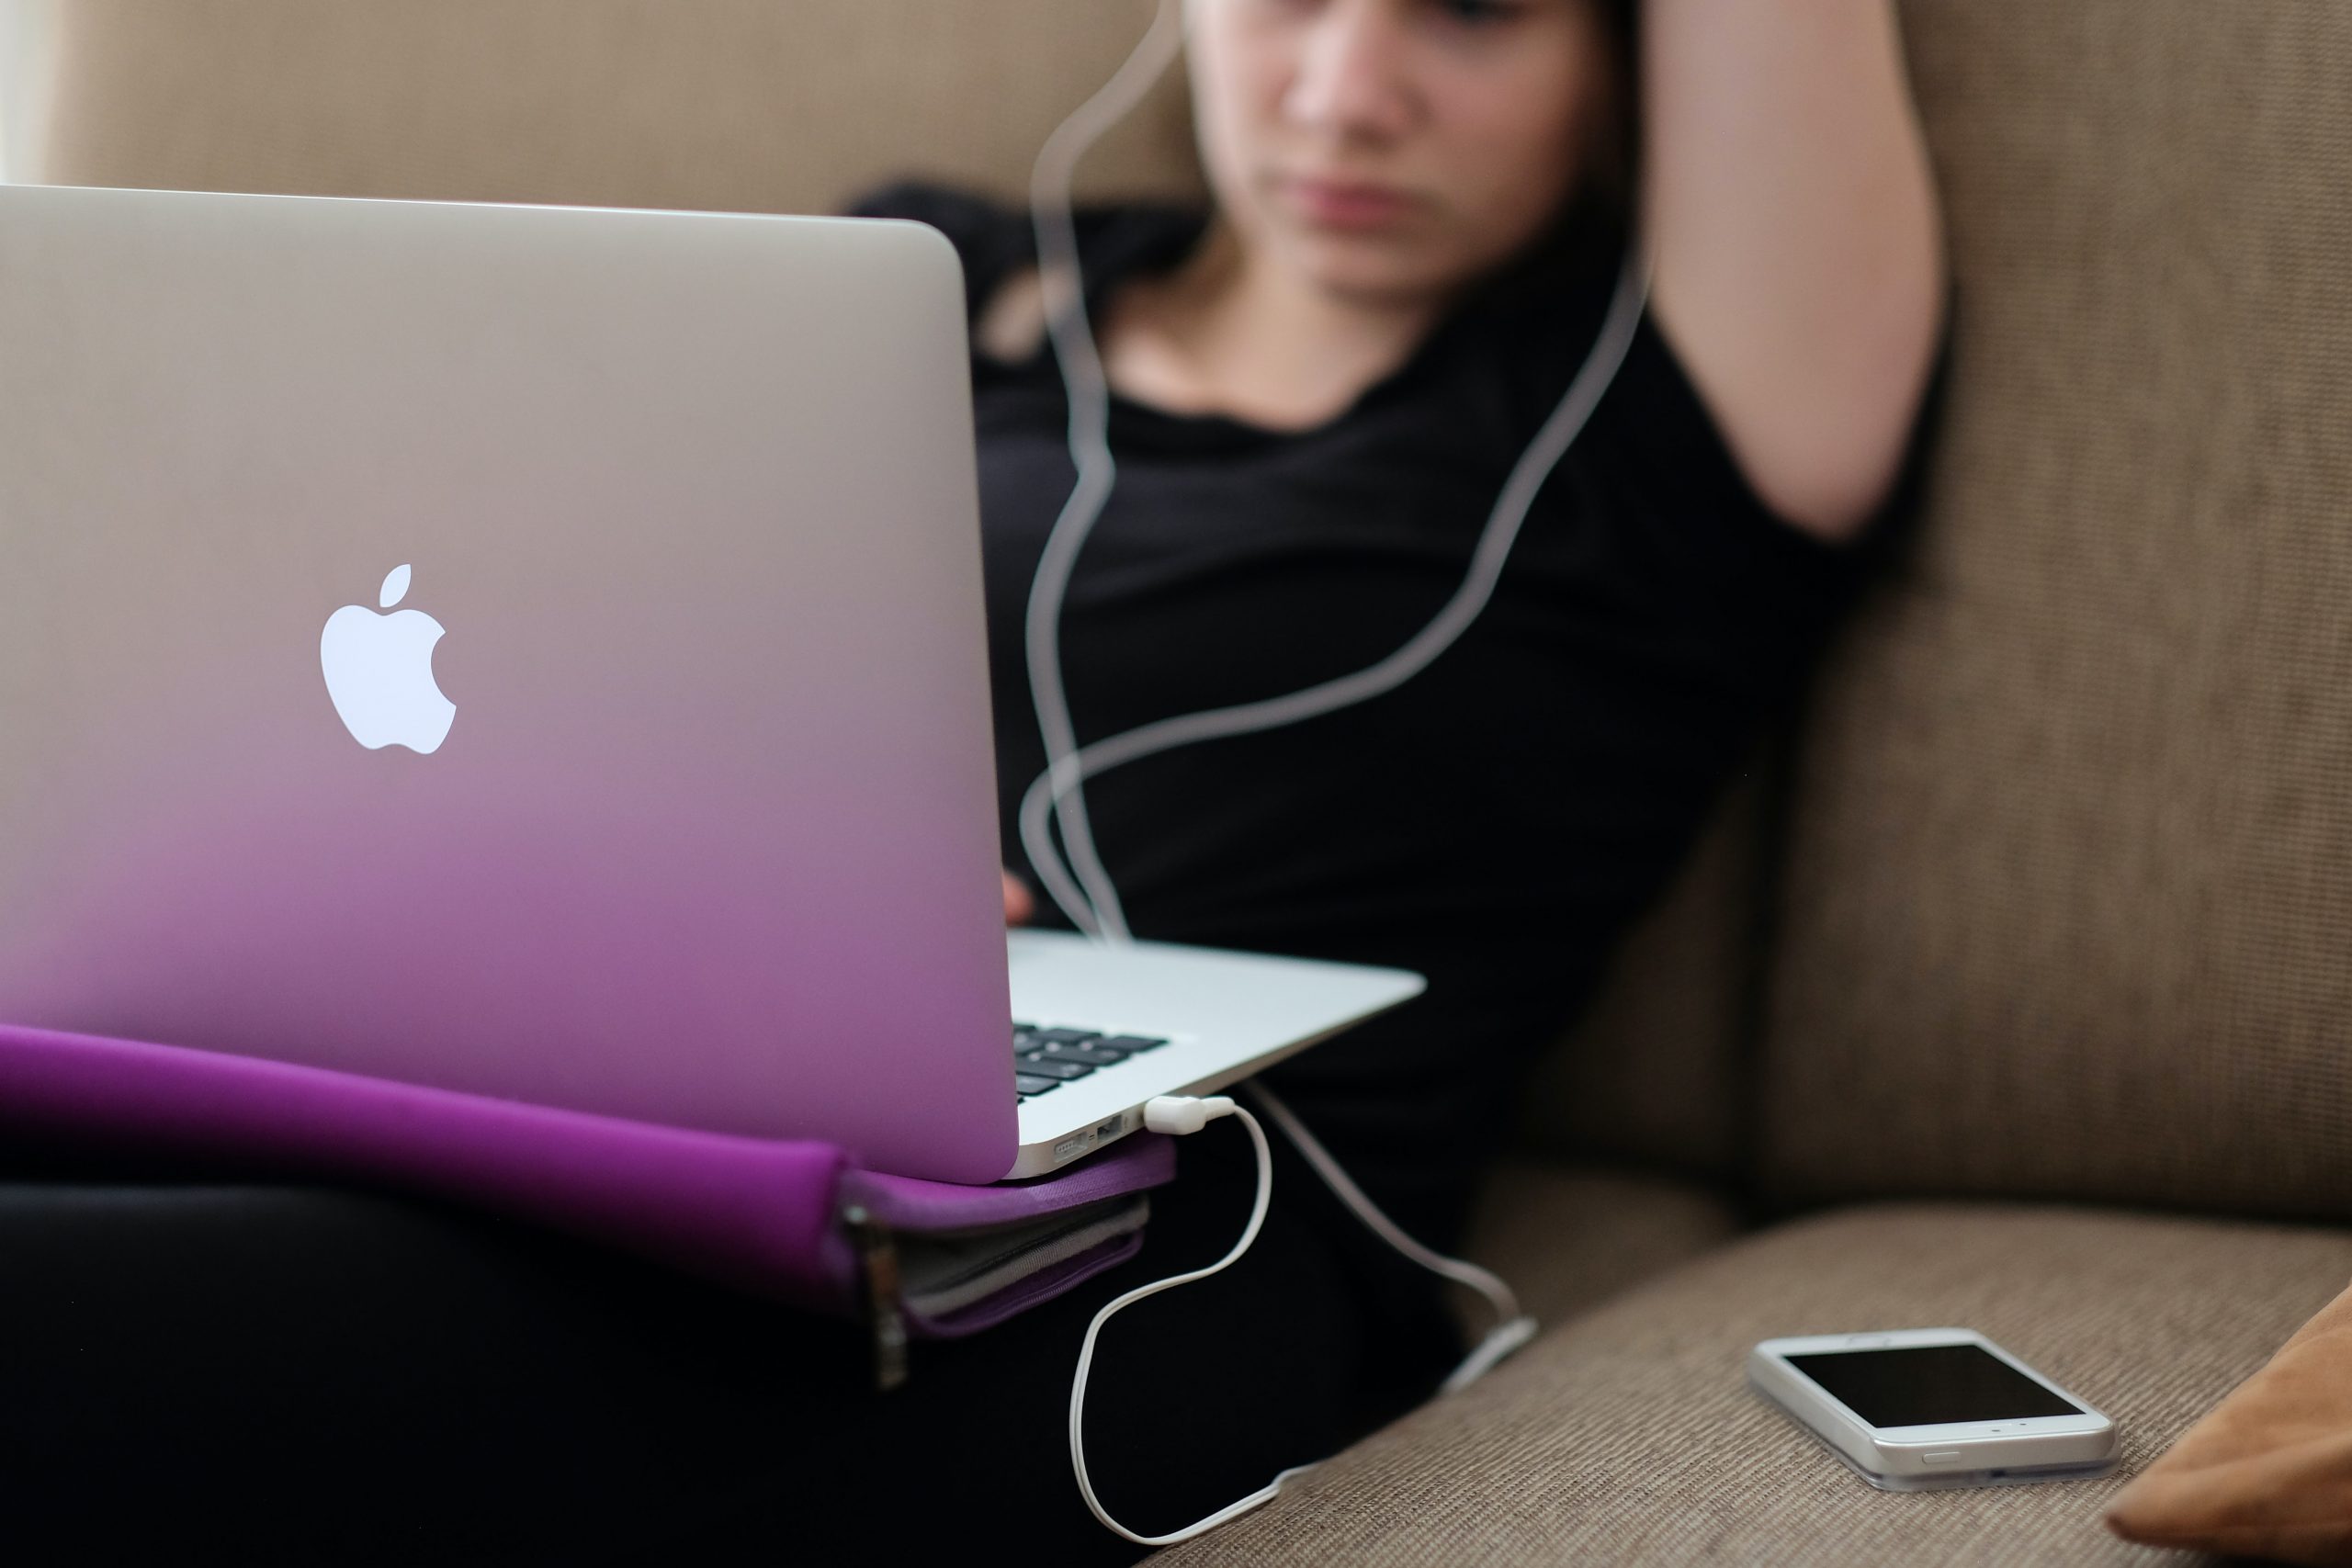 A young person sits on their laptop on a sofa. The shot shows them with a MacBook on their lap and a phone by their side. They are wearing earphones.